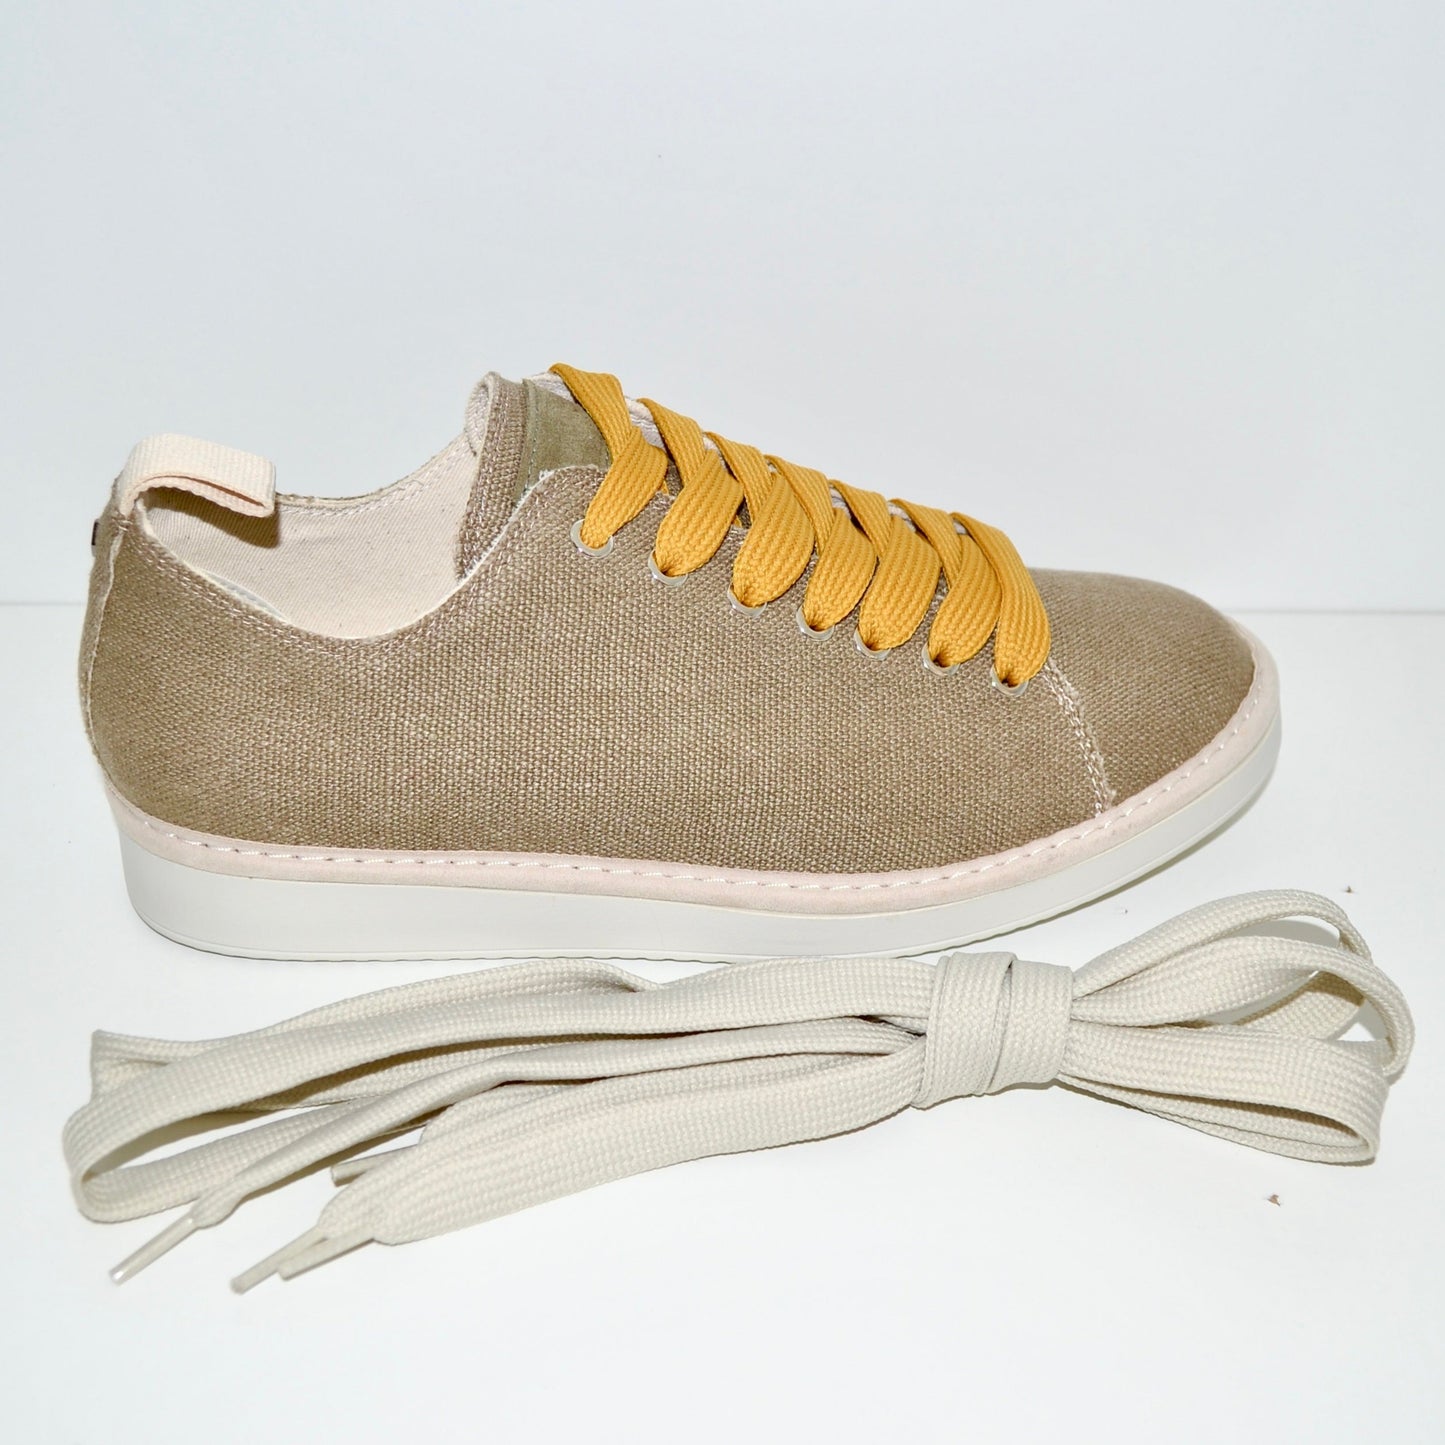 Sneakers Panchic man military olive